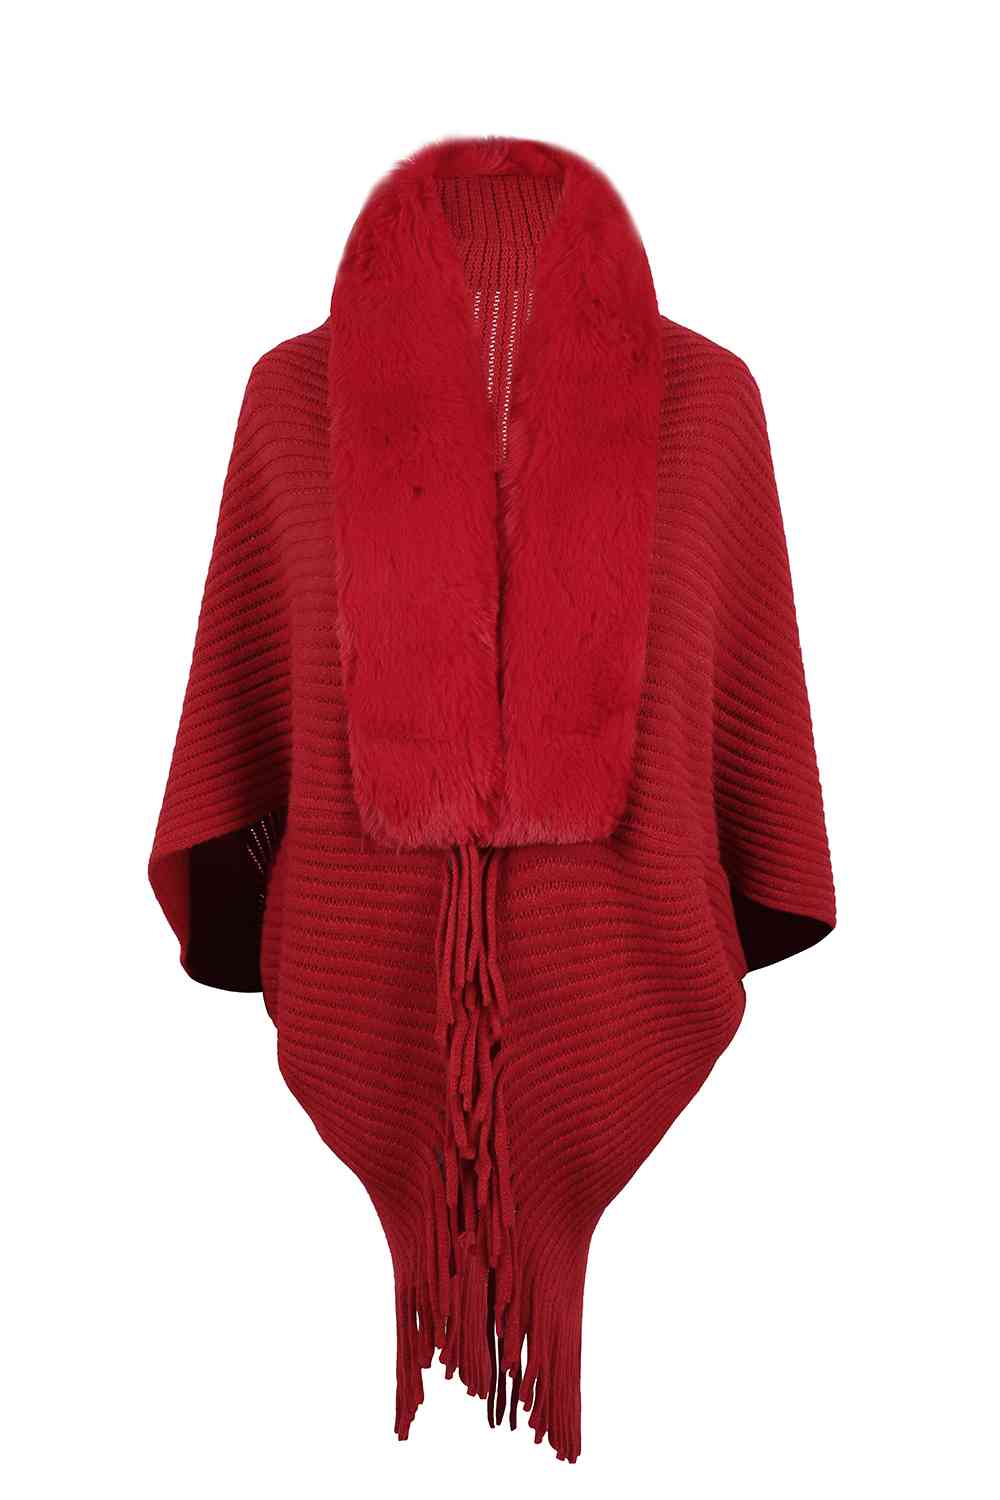 Red open front poncho with fringe and faux fur trim